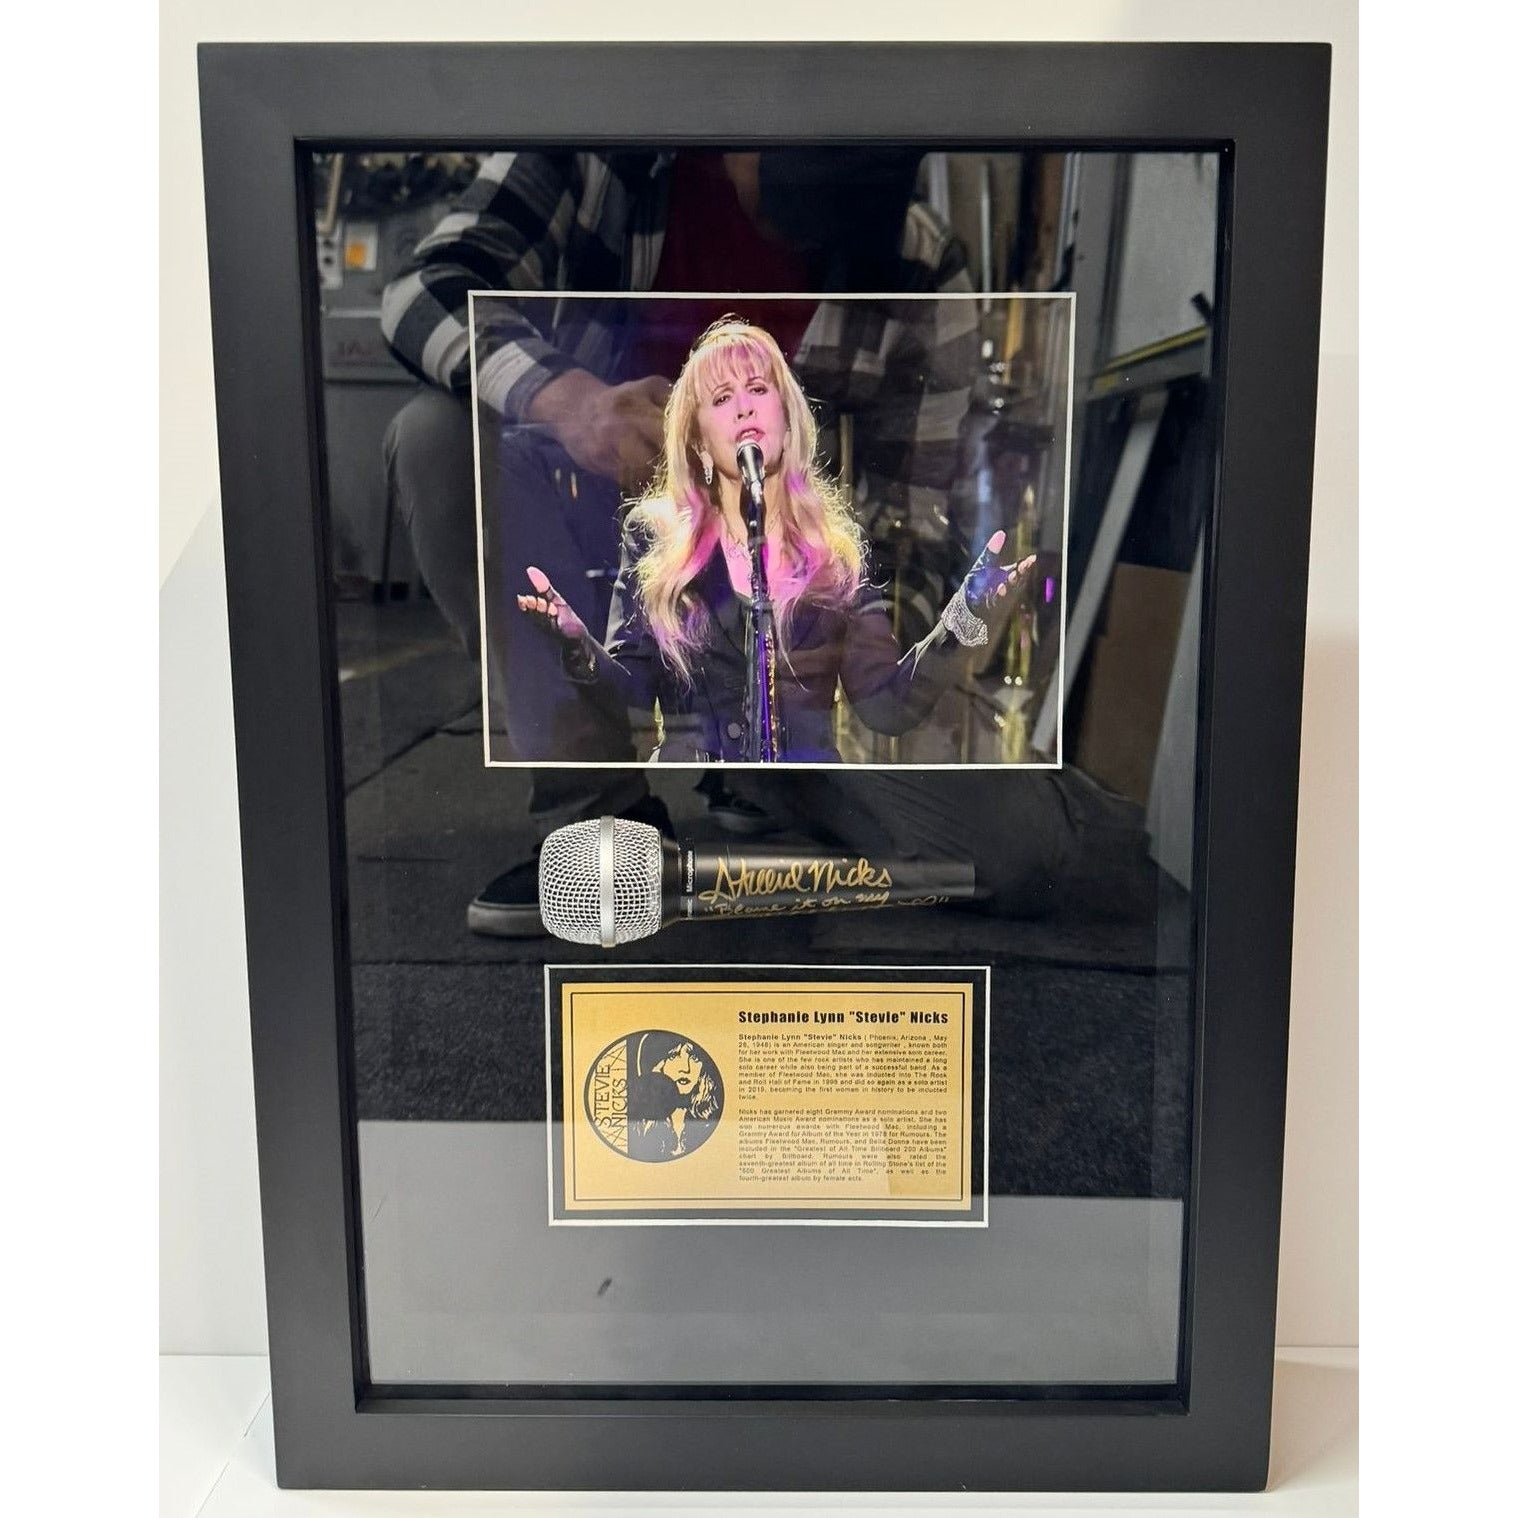 Stevie Nicks Fleetwood Mac iconic singer microphone signed and framed  with proof